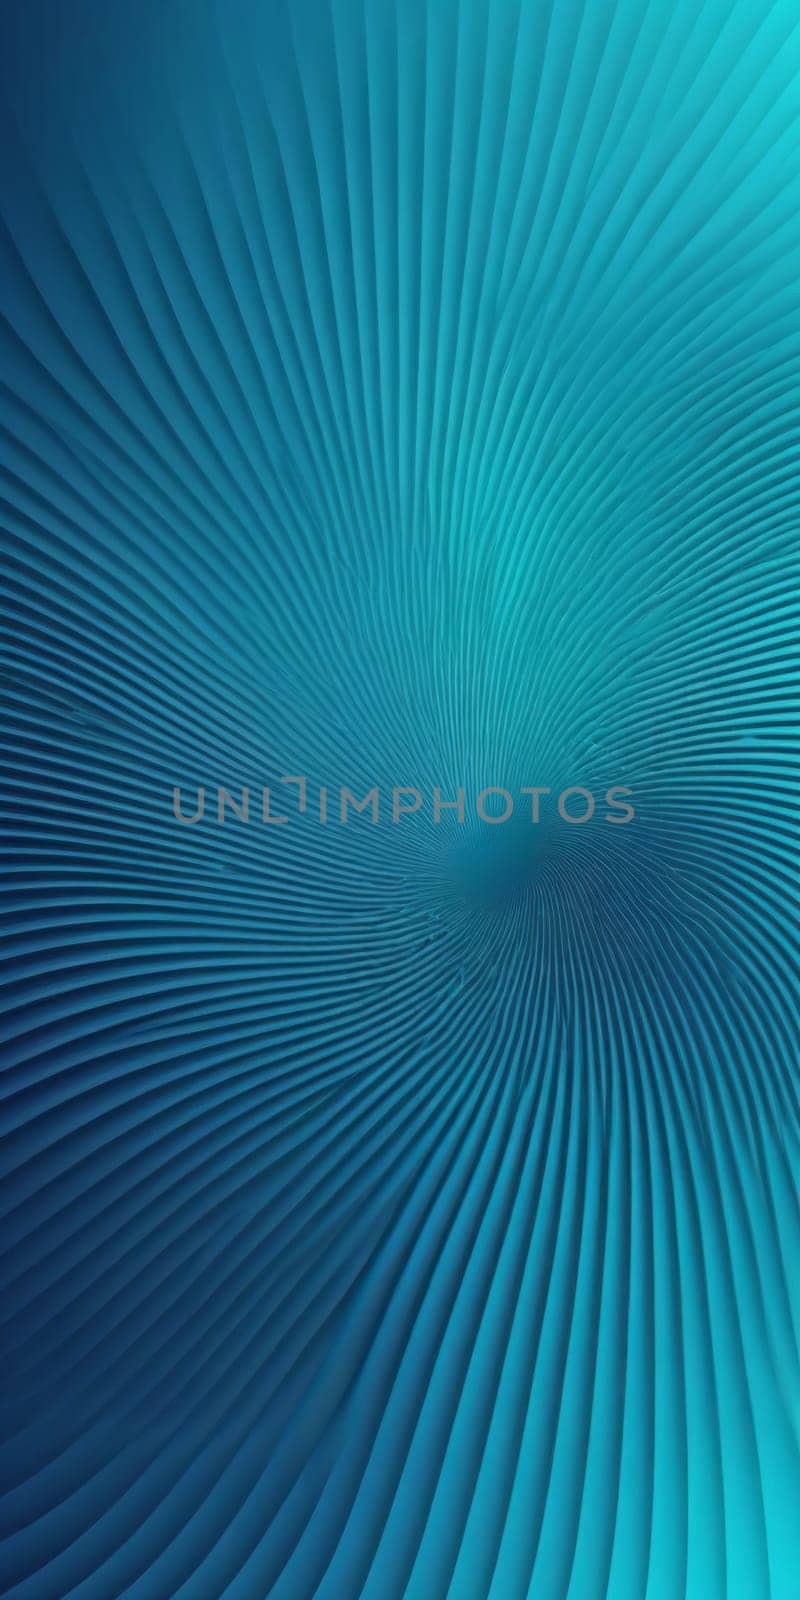 Fluted Shapes in Blue and Turquoise by nkotlyar